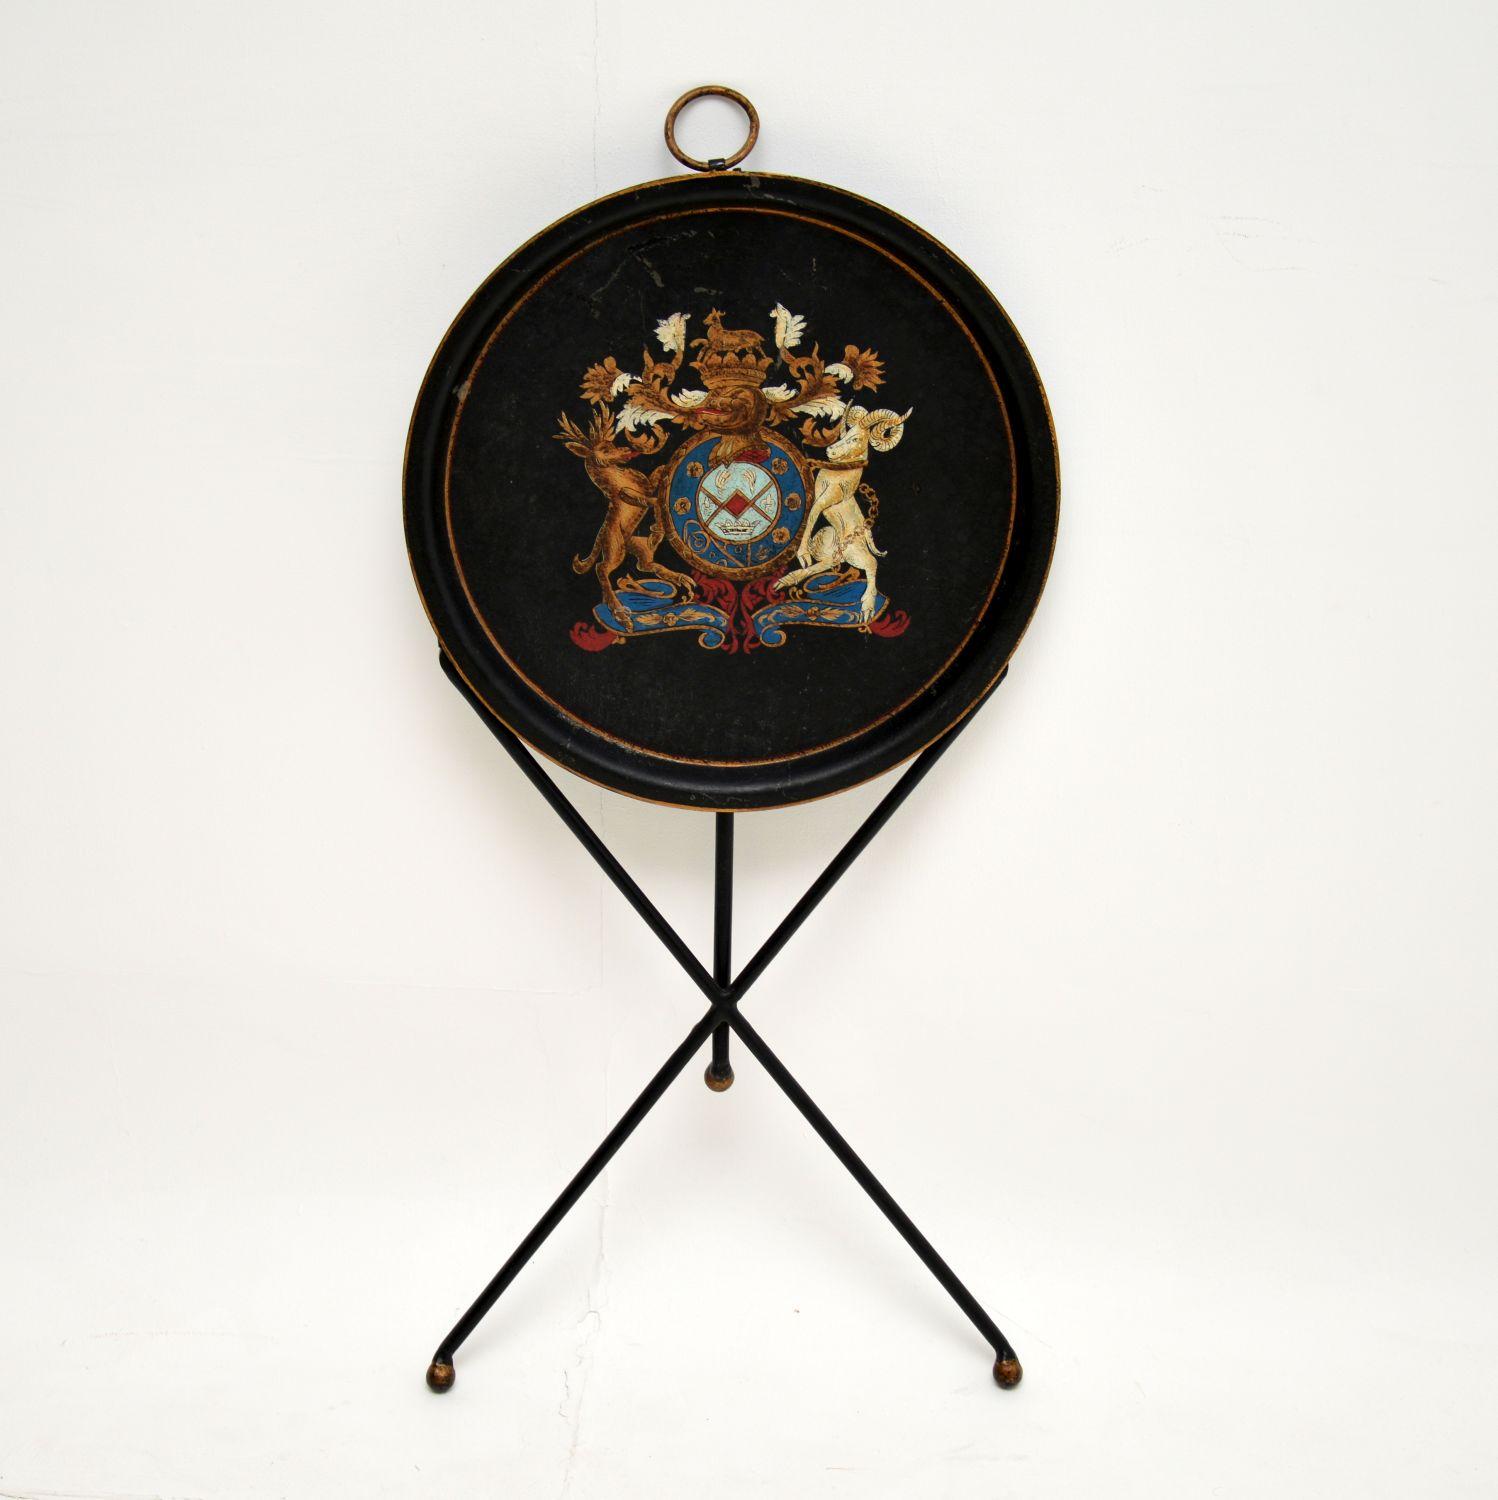 A lovely antique folding side table in enamelled metal, otherwise known as tole. This was made in France, it dates from the 1900-1920’s period.

It is very well made, and decorated with a beautiful coat of arms. There is a ring handle on one side,